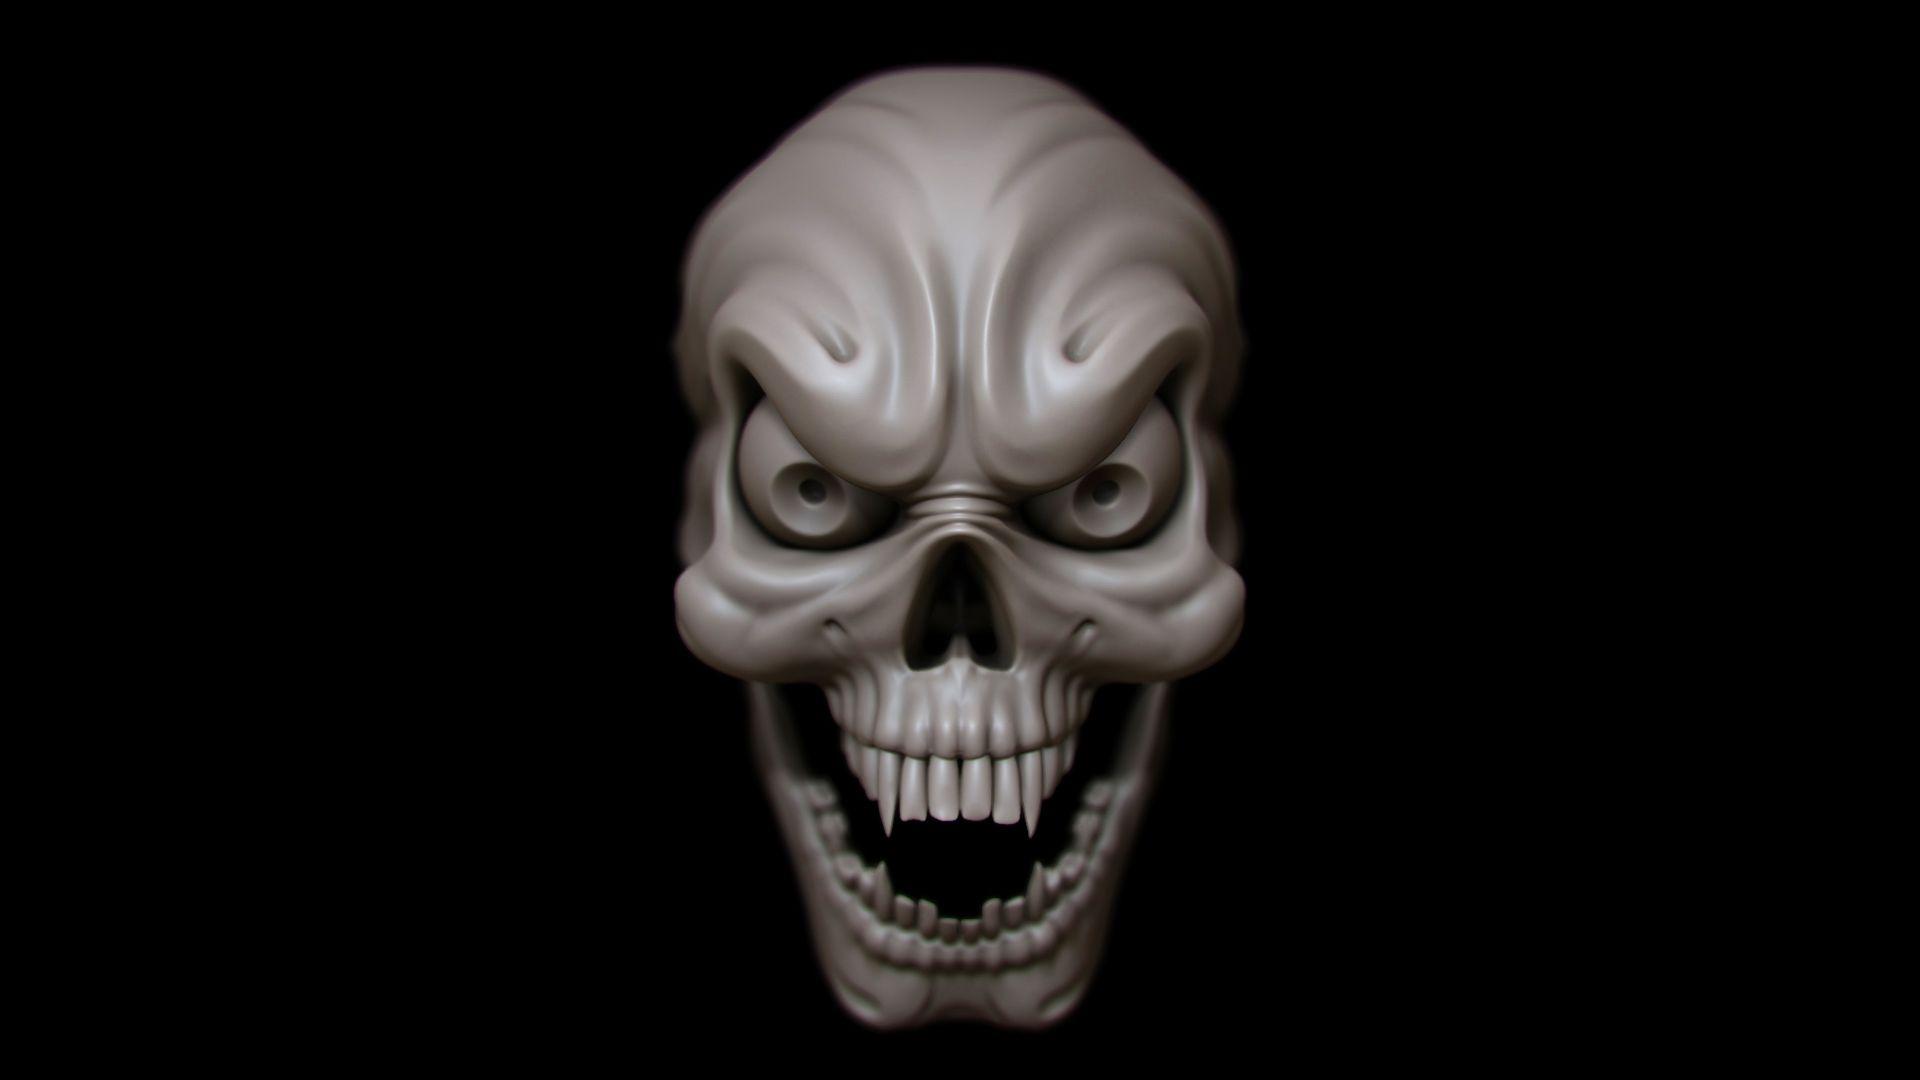 Skull Wallpapers Widescreen Latest.